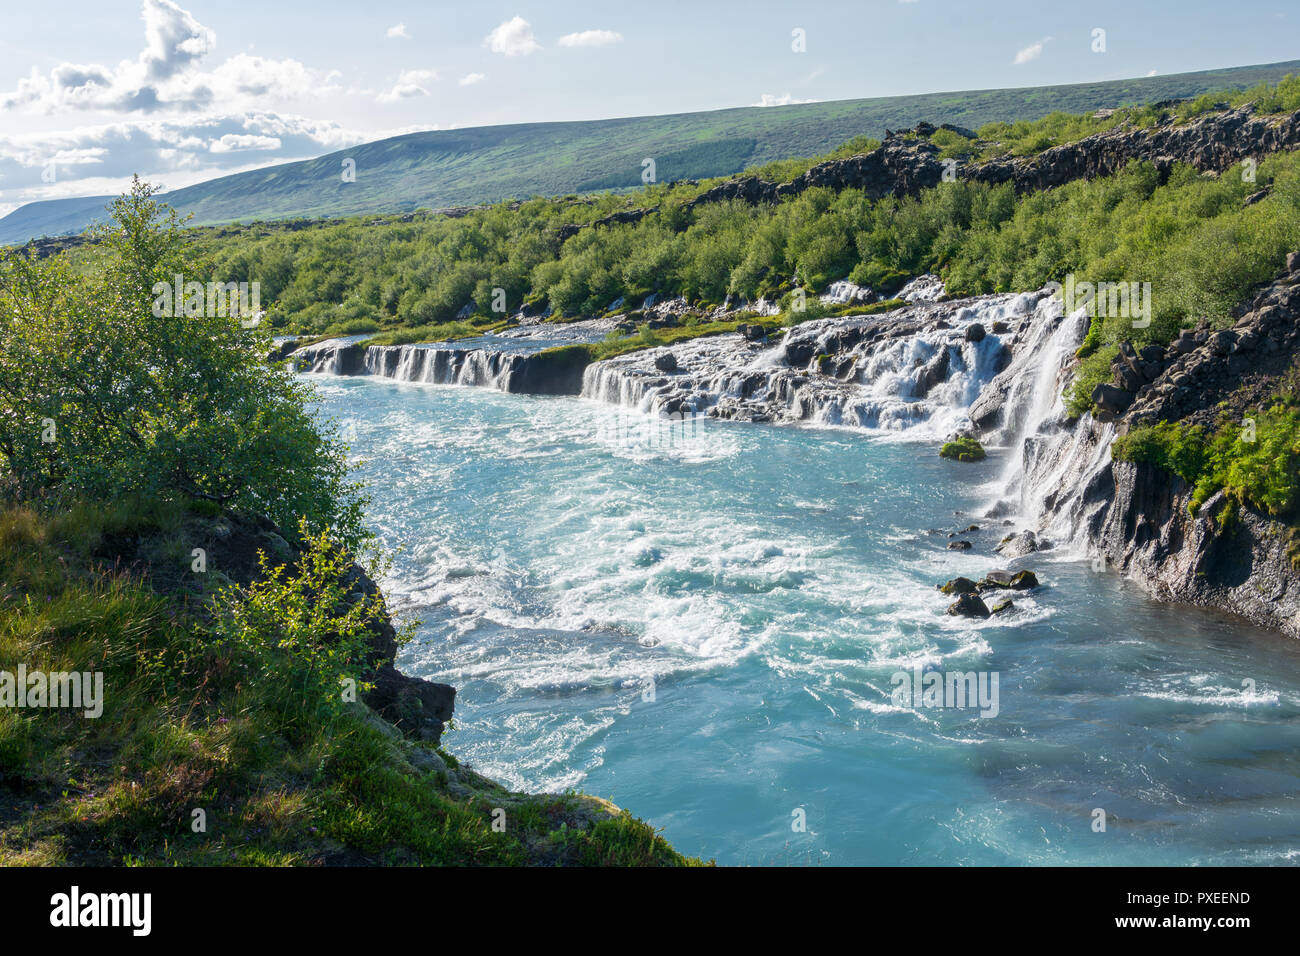 Hraunfossar lava falls in Iceland, where water comes out of the porous lava rock as watterfalls Stock Photo